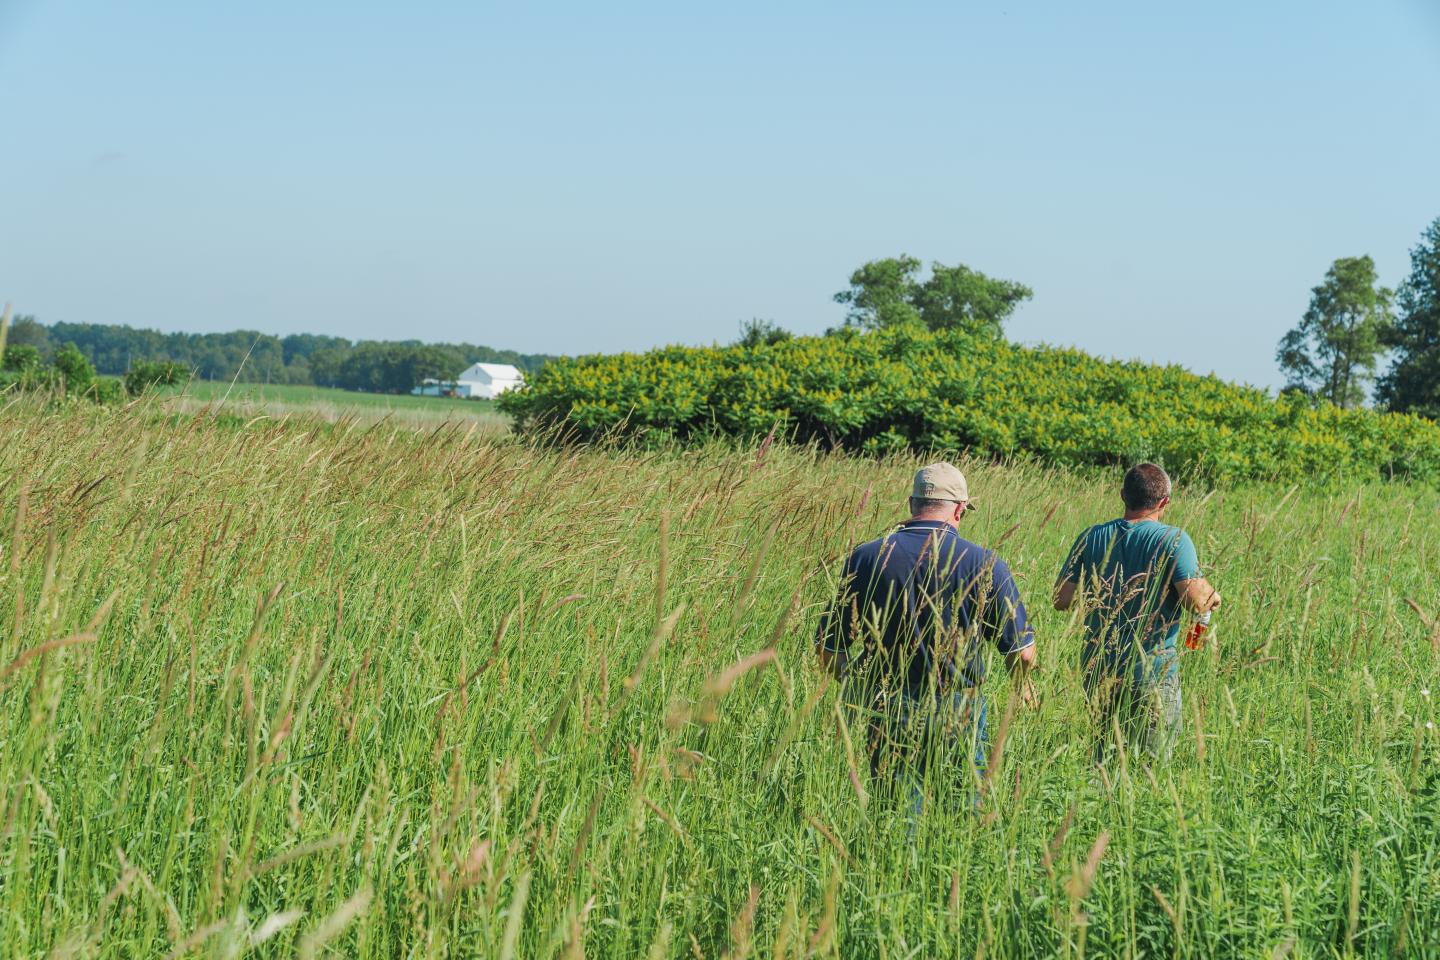 John Bellman (front) gives a tour of his Wetland Reserve Easement in Marshall County, Indiana to Troy Manges, Indiana NRCS district conservationist, on June 14, 2022.